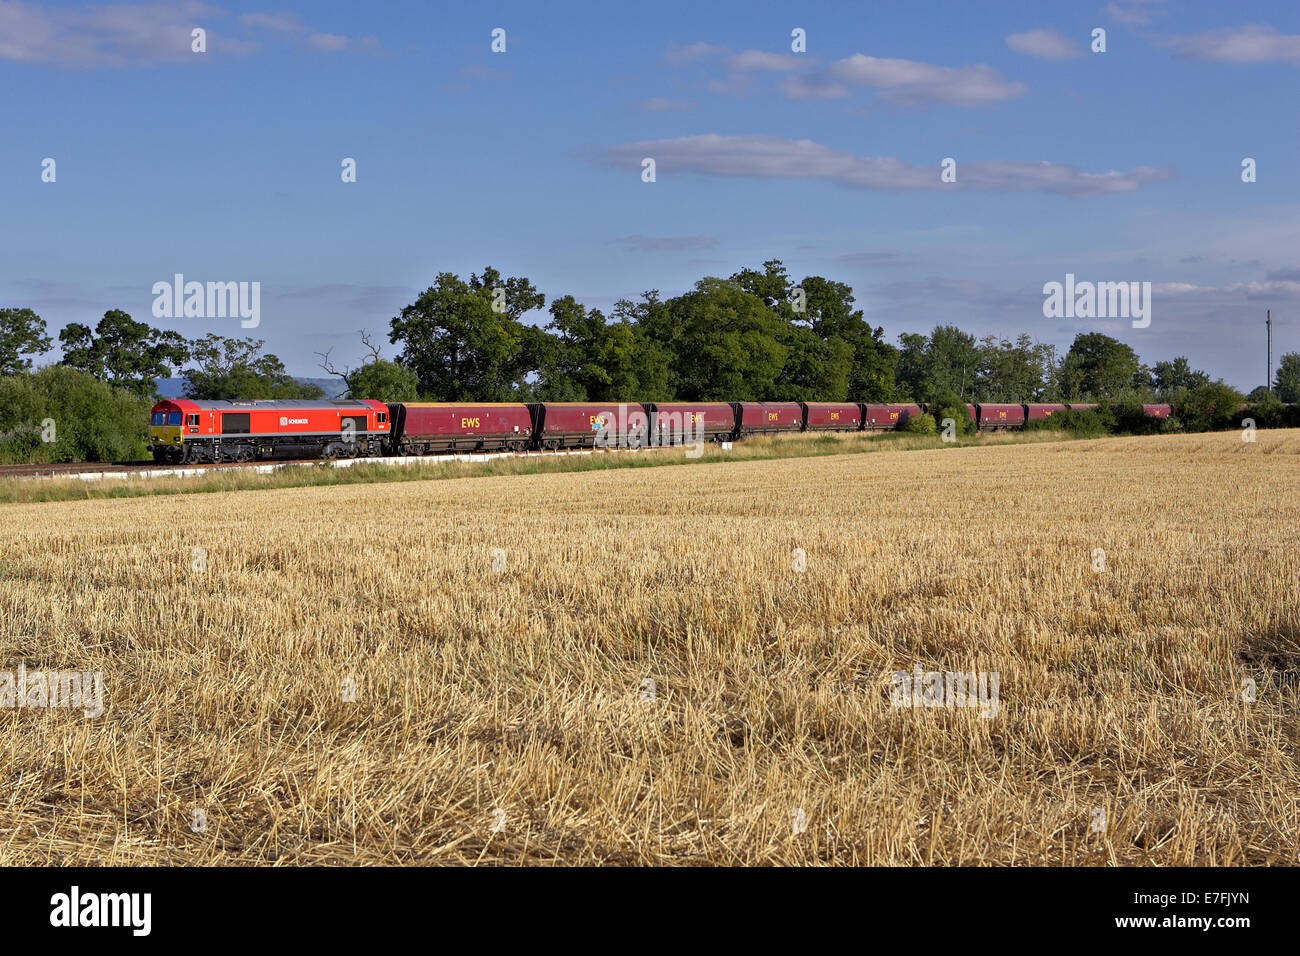 DBS 66185 passes through Spetchley, worcestershire with an Avonmouth - Ratcliffe power station coal train on 15/07/14. Stock Photo